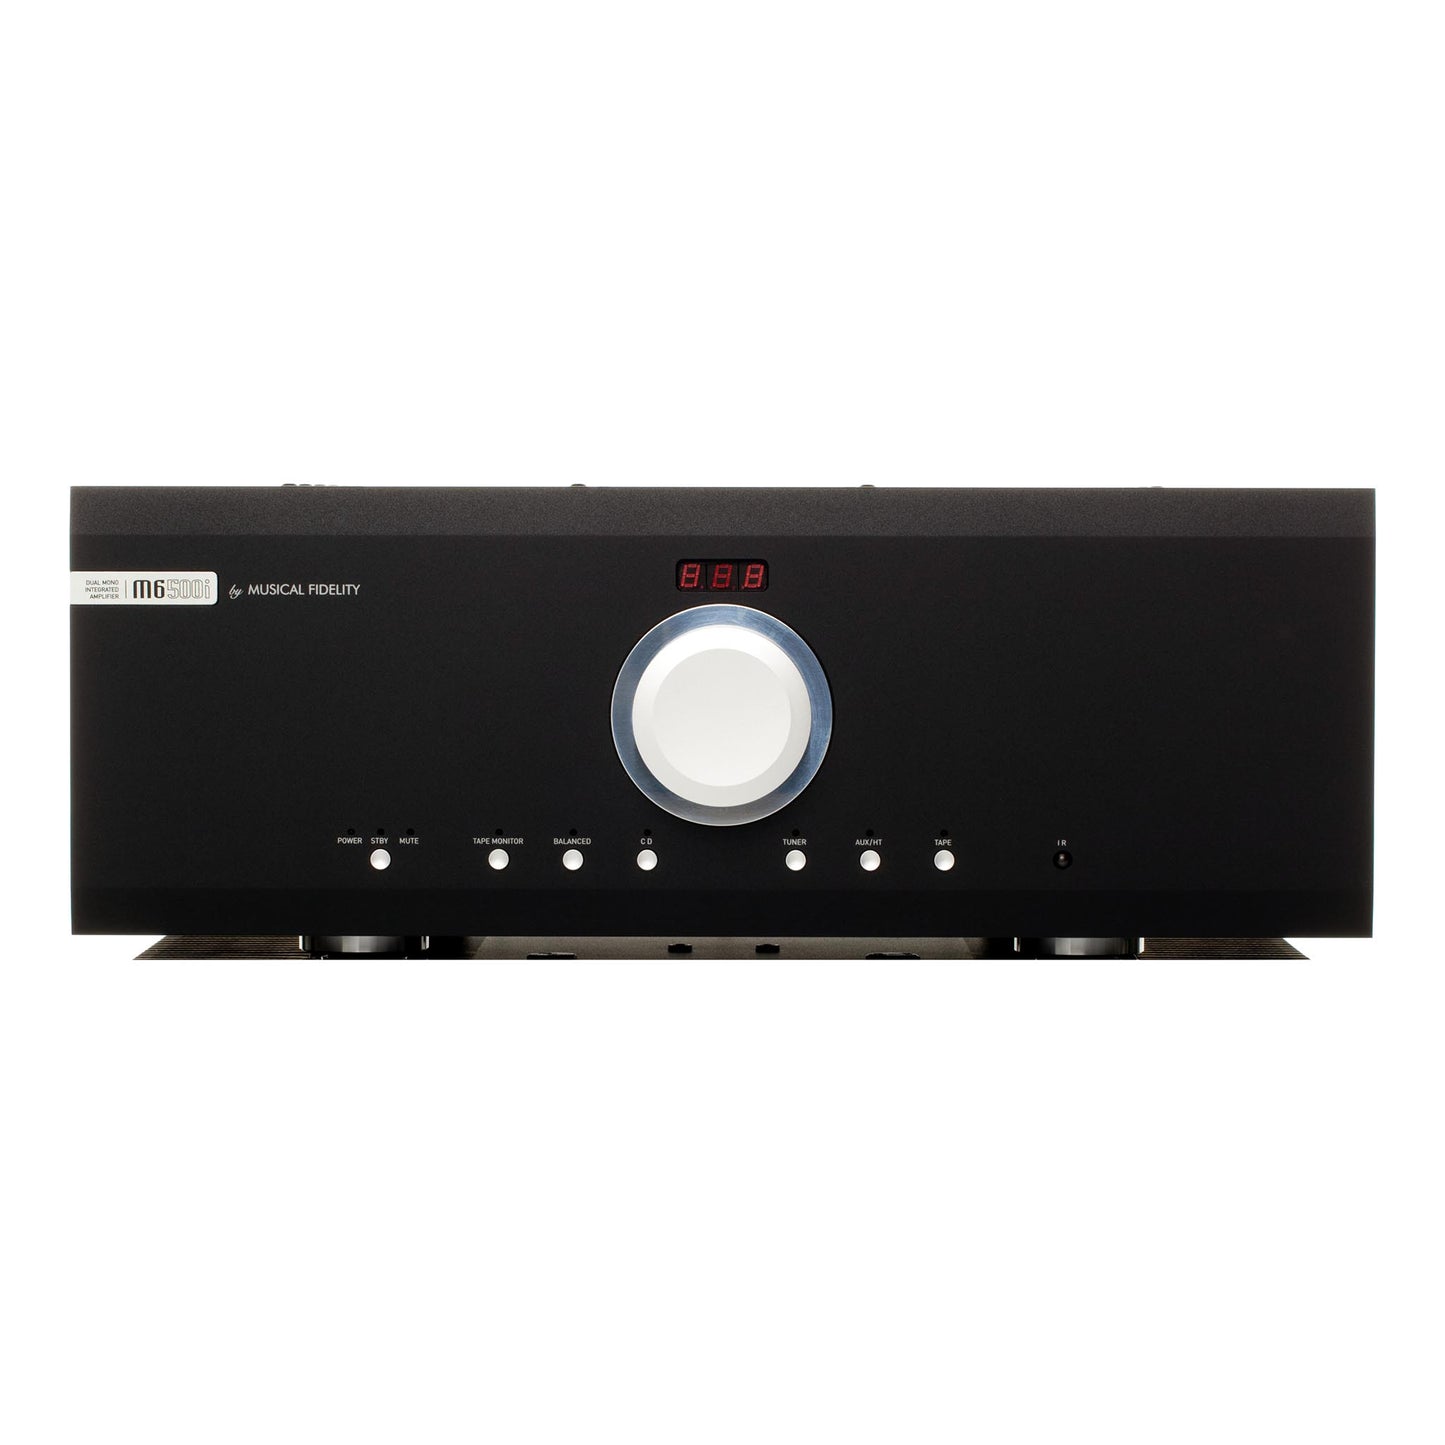 Musical Fidelity M6si500 Integrated Amplifier